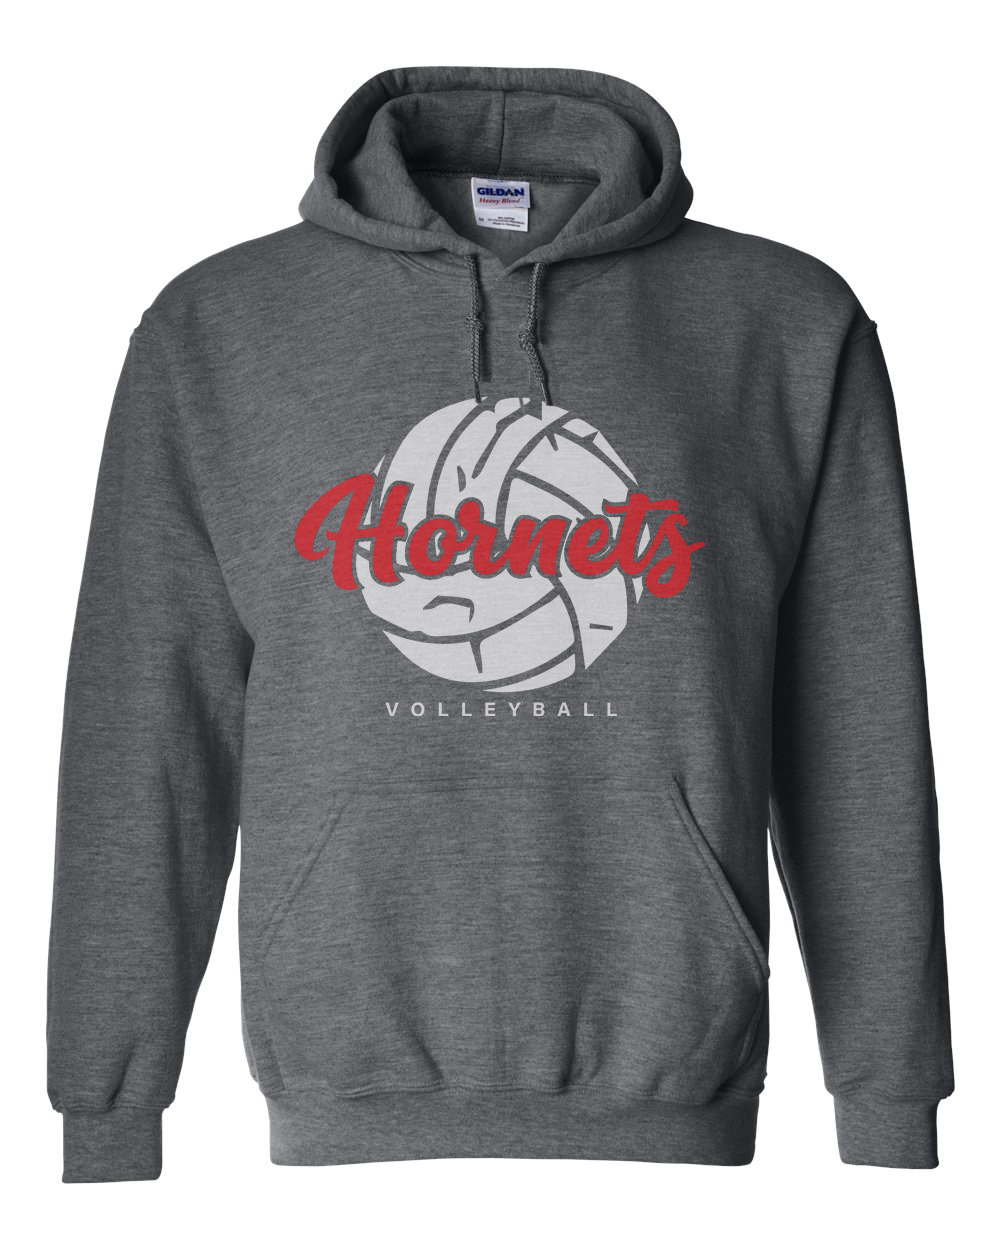 Hornets Volleyball Vintage Wash Hoodie – Hickory Hornet Wear